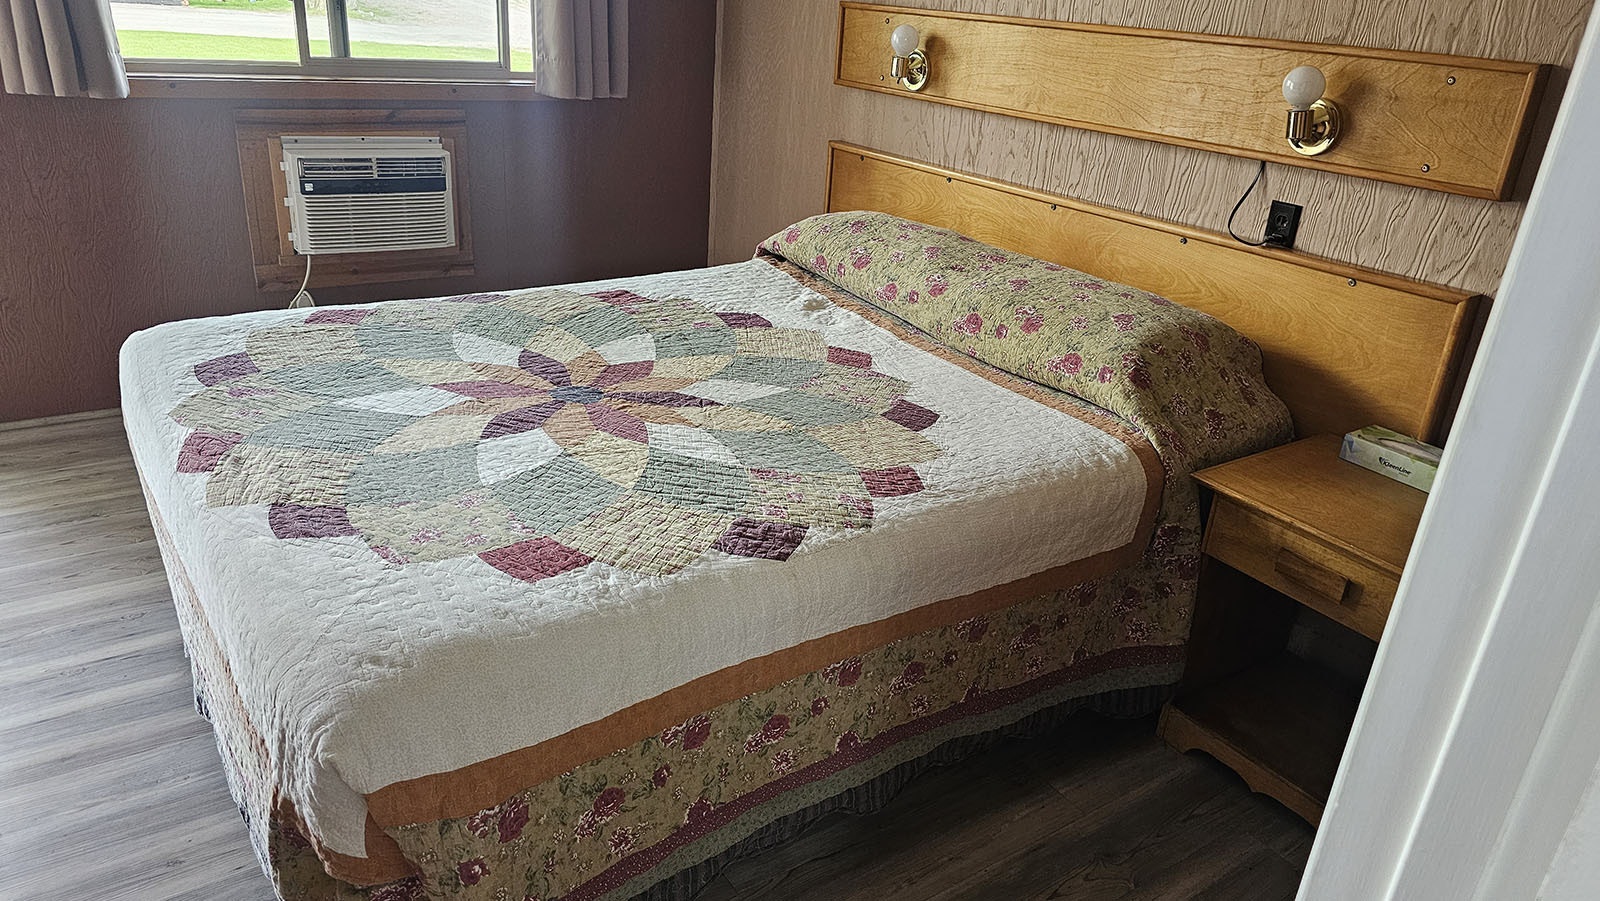 Beds are generally comfortable, with cute, homey quilts covering them.